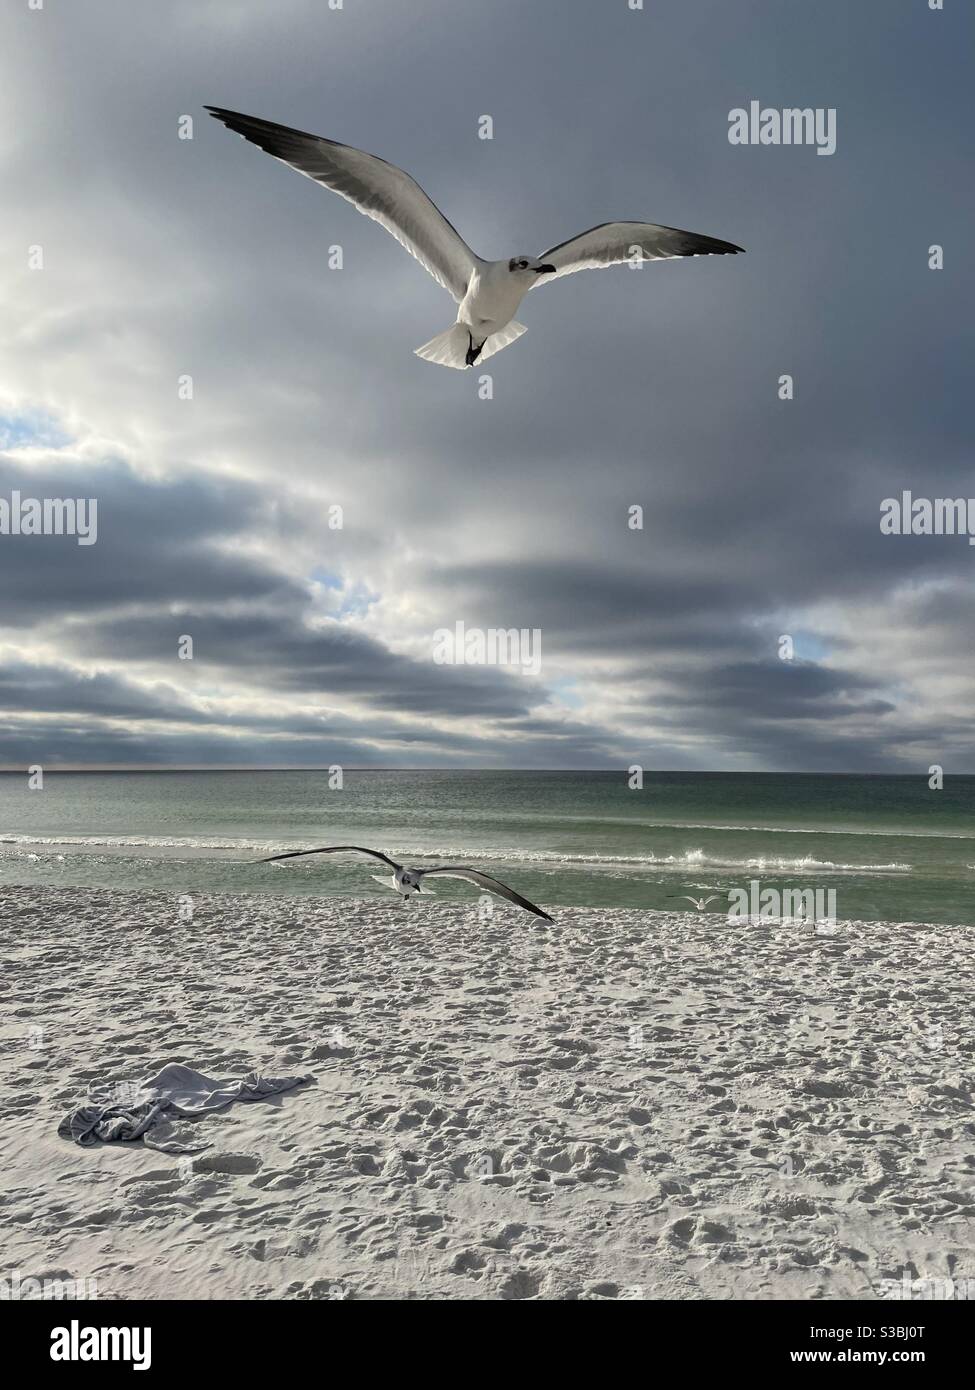 Seagulls inflight over white sand Florida beach with early morning cloudy skies Stock Photo